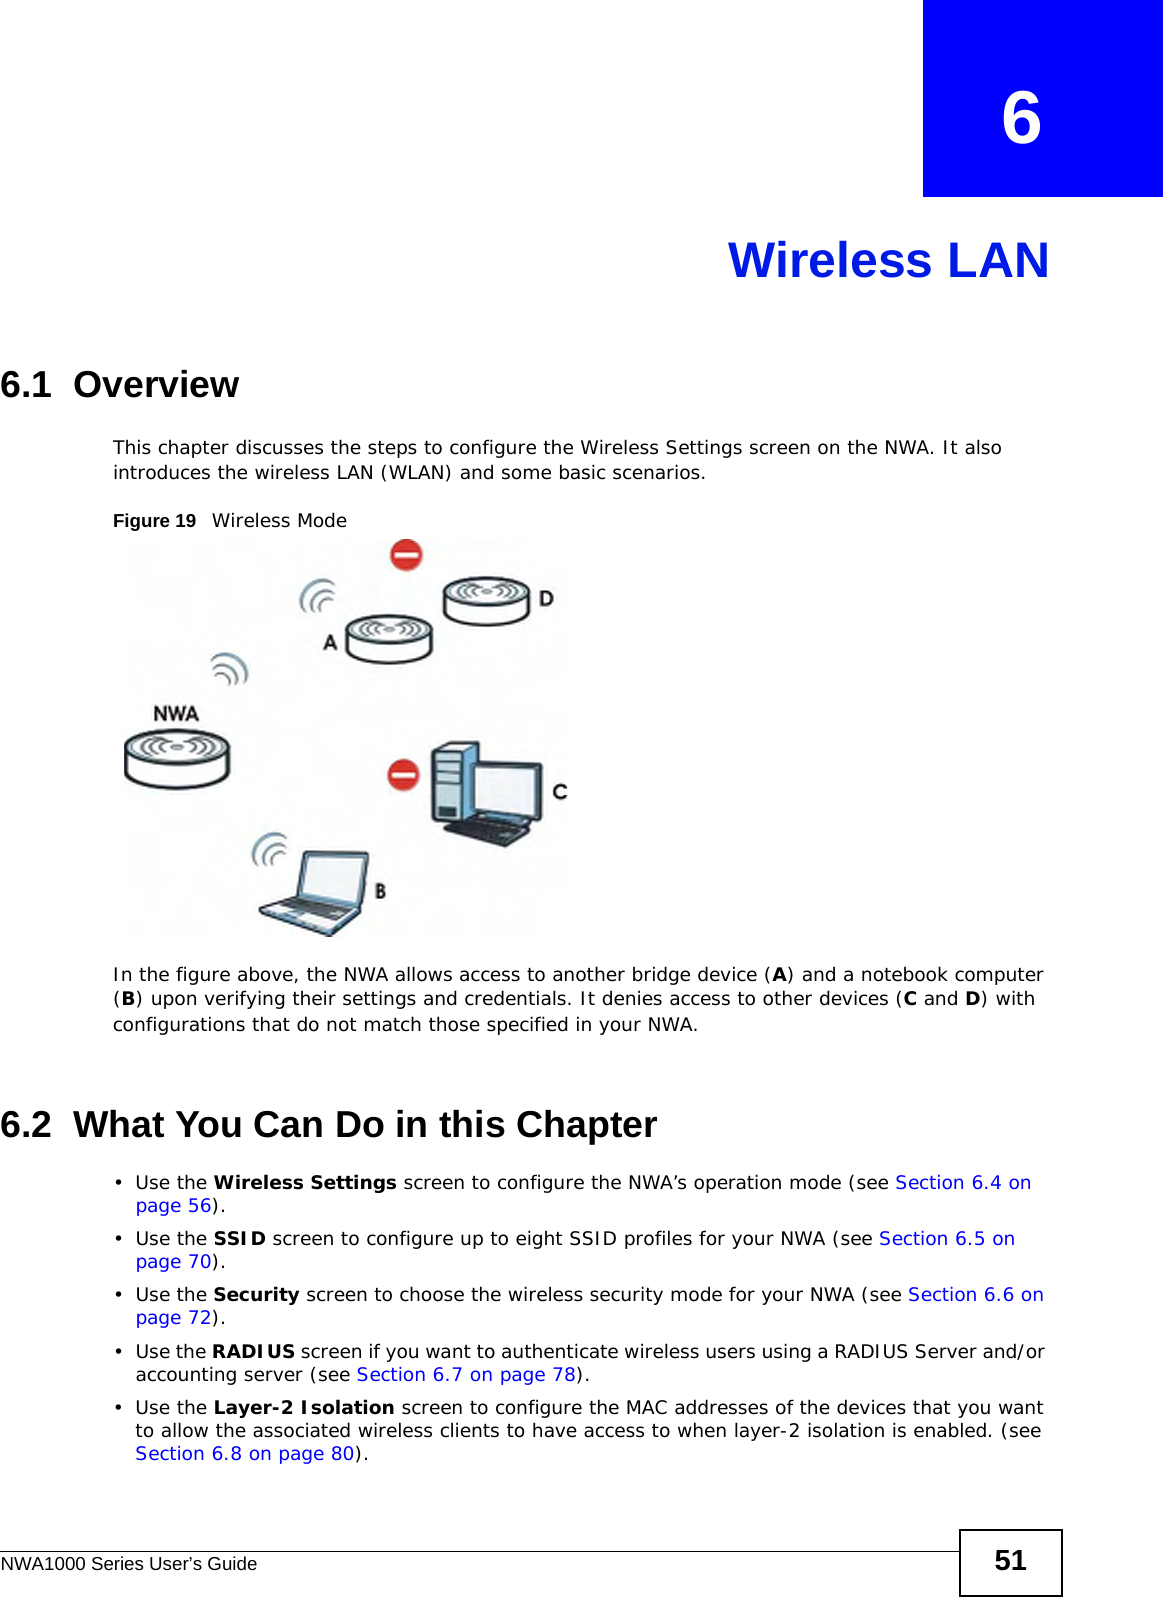 NWA1000 Series User’s Guide 51CHAPTER   6Wireless LAN6.1  OverviewThis chapter discusses the steps to configure the Wireless Settings screen on the NWA. It also introduces the wireless LAN (WLAN) and some basic scenarios.Figure 19   Wireless ModeIn the figure above, the NWA allows access to another bridge device (A) and a notebook computer (B) upon verifying their settings and credentials. It denies access to other devices (C and D) with configurations that do not match those specified in your NWA.6.2  What You Can Do in this Chapter•Use the Wireless Settings screen to configure the NWA’s operation mode (see Section 6.4 on page 56).•Use the SSID screen to configure up to eight SSID profiles for your NWA (see Section 6.5 on page 70).•Use the Security screen to choose the wireless security mode for your NWA (see Section 6.6 on page 72).•Use the RADIUS screen if you want to authenticate wireless users using a RADIUS Server and/or accounting server (see Section 6.7 on page 78).•Use the Layer-2 Isolation screen to configure the MAC addresses of the devices that you want to allow the associated wireless clients to have access to when layer-2 isolation is enabled. (see Section 6.8 on page 80).